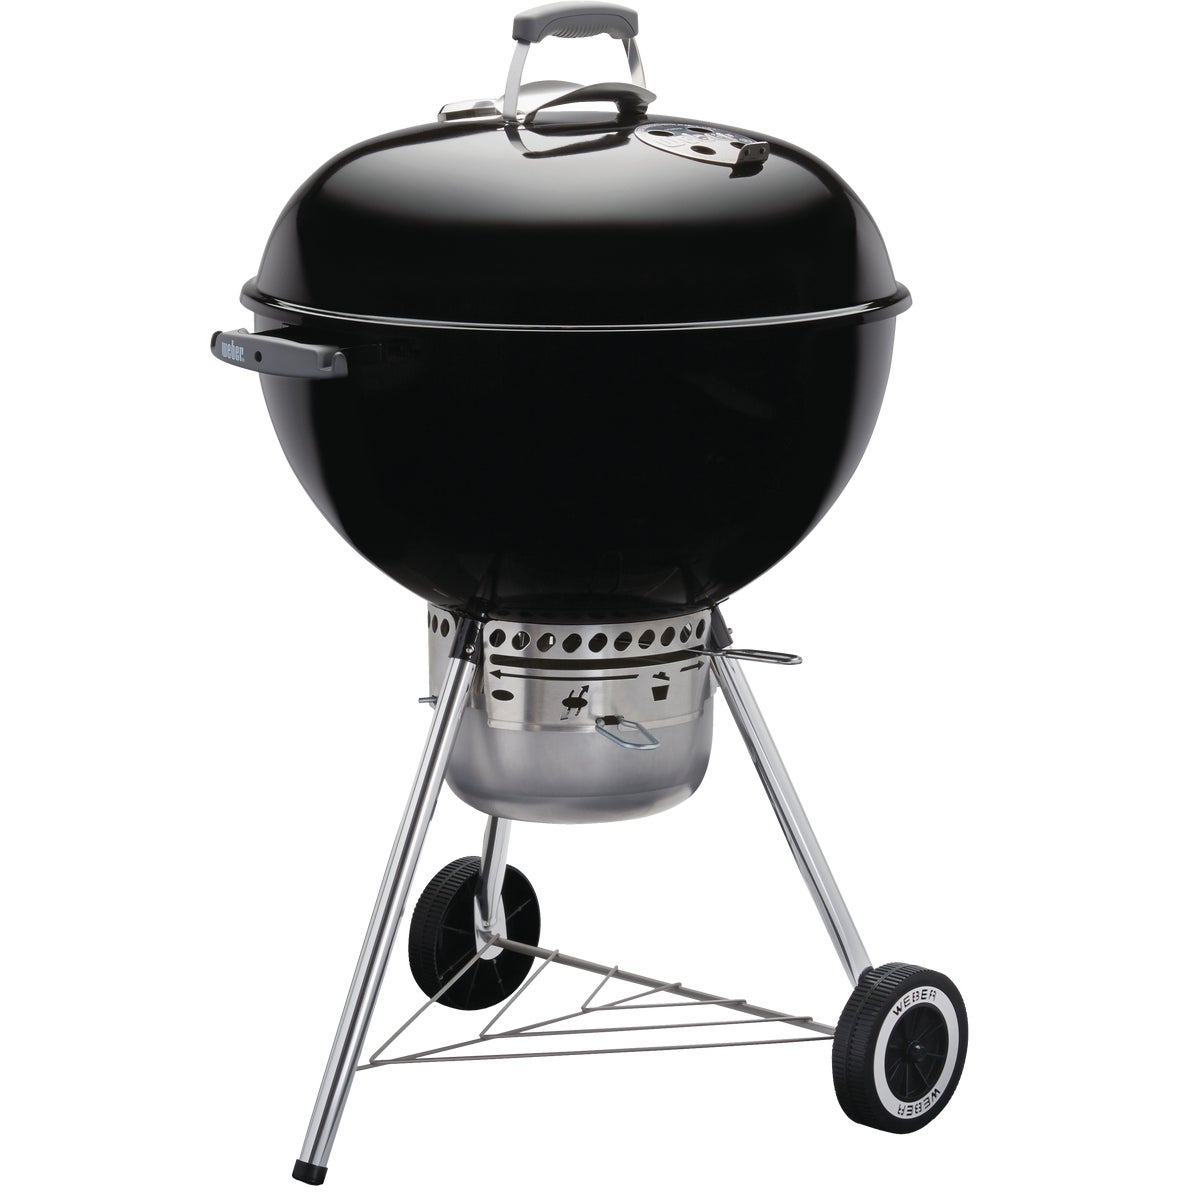 Item 801283, Spark your passion for charcoal grilling with the Kettle that started it 